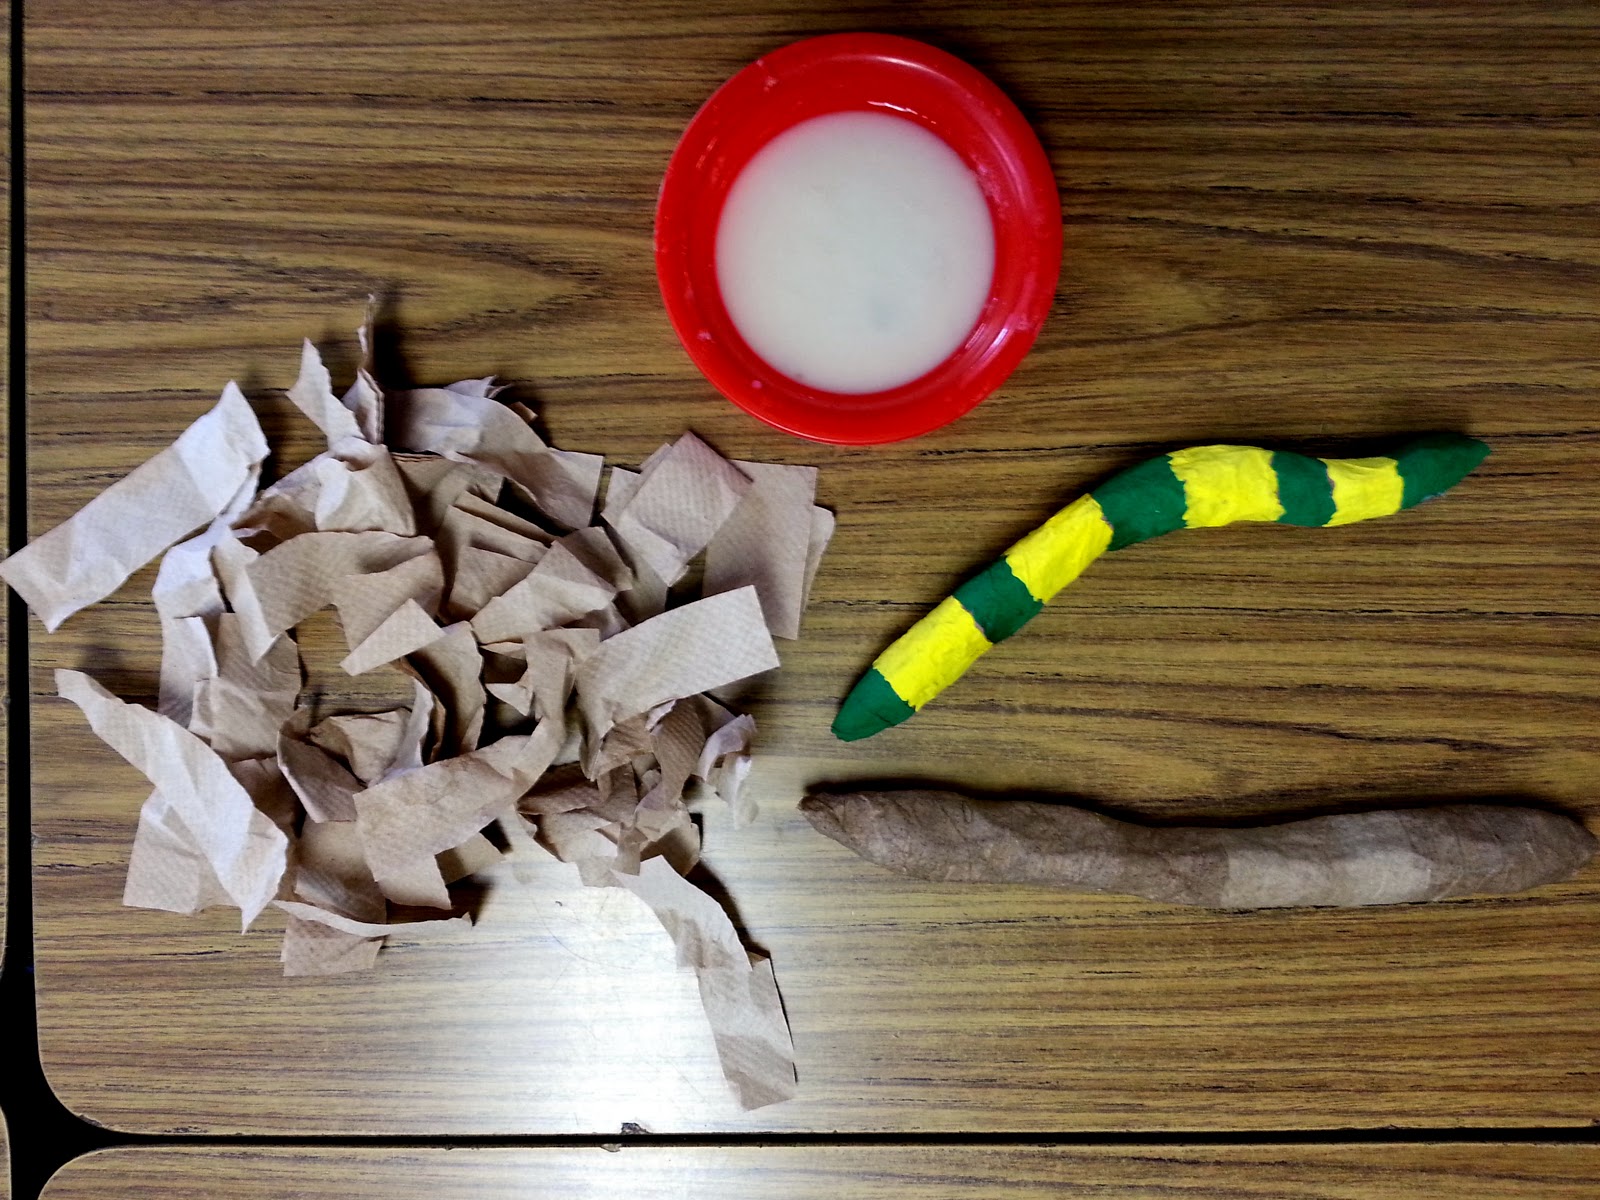 Choices for Children: Paper Mache Snakes